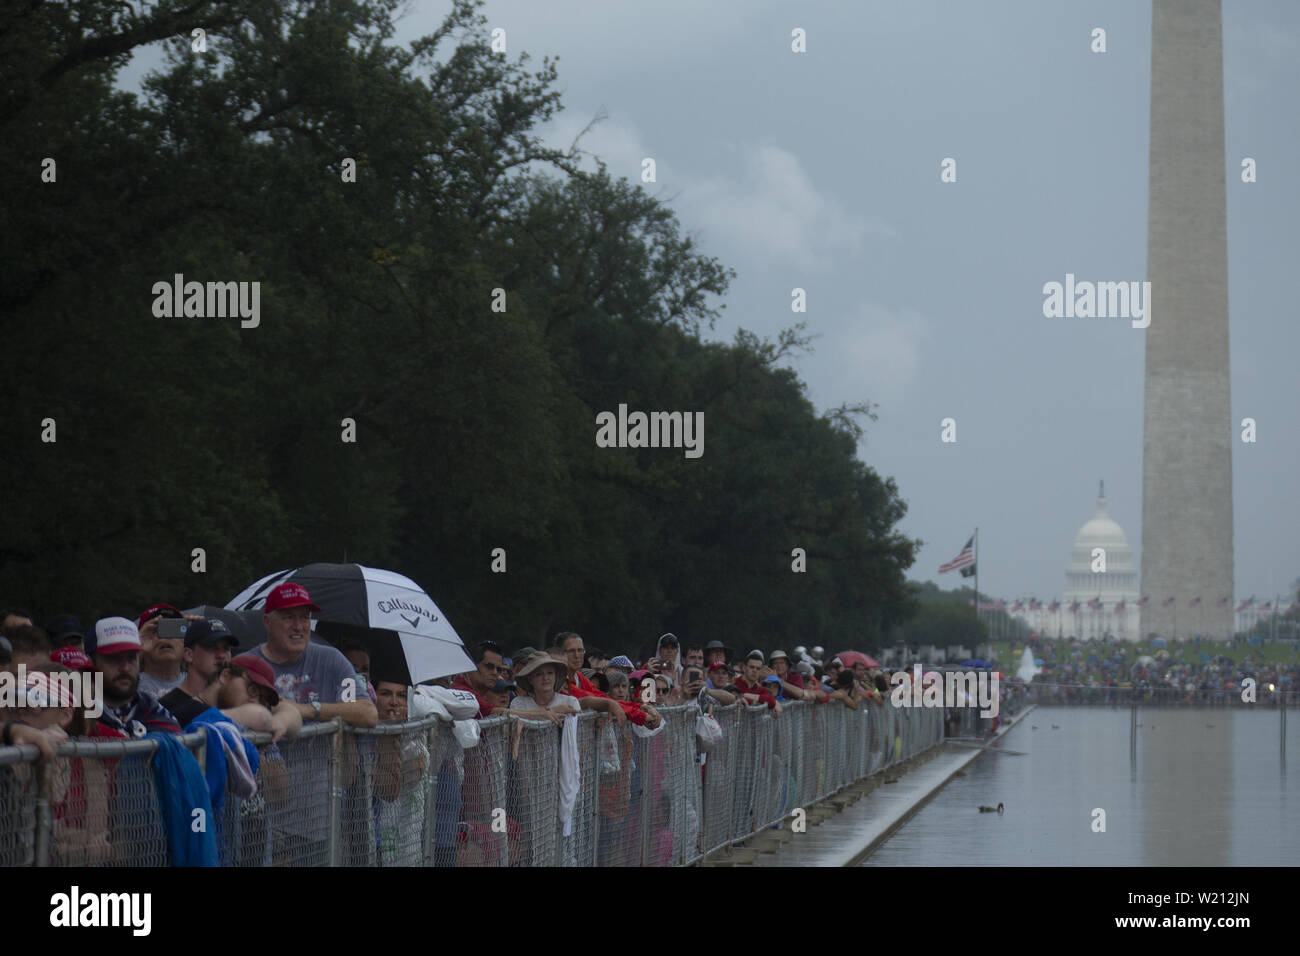 Washington, District of Columbia, USA. 4th July, 2019. Crowds gather prior to United States President Donald J. Trump's Salute to America event in Washington DC on July 4, 2019. Credit: Stefani Reynolds/CNP/ZUMA Wire/Alamy Live News Stock Photo